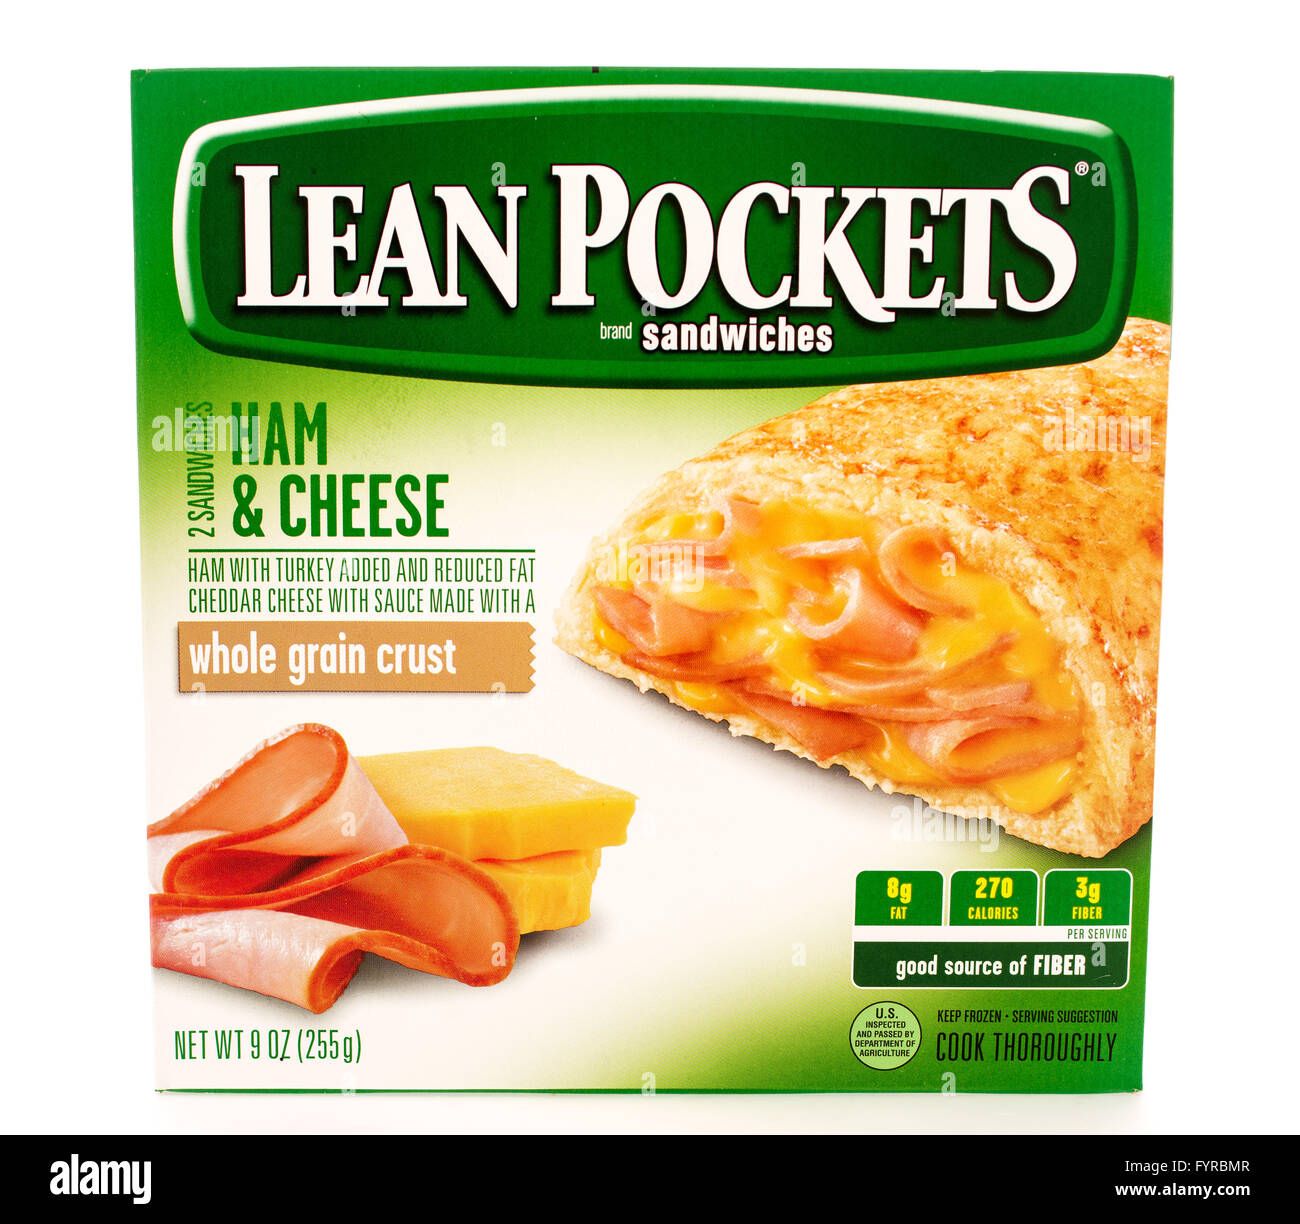 Winneconni, WI - 13 June 2015: Box of Lean Pockets ham and cheese flavor. Stock Photo